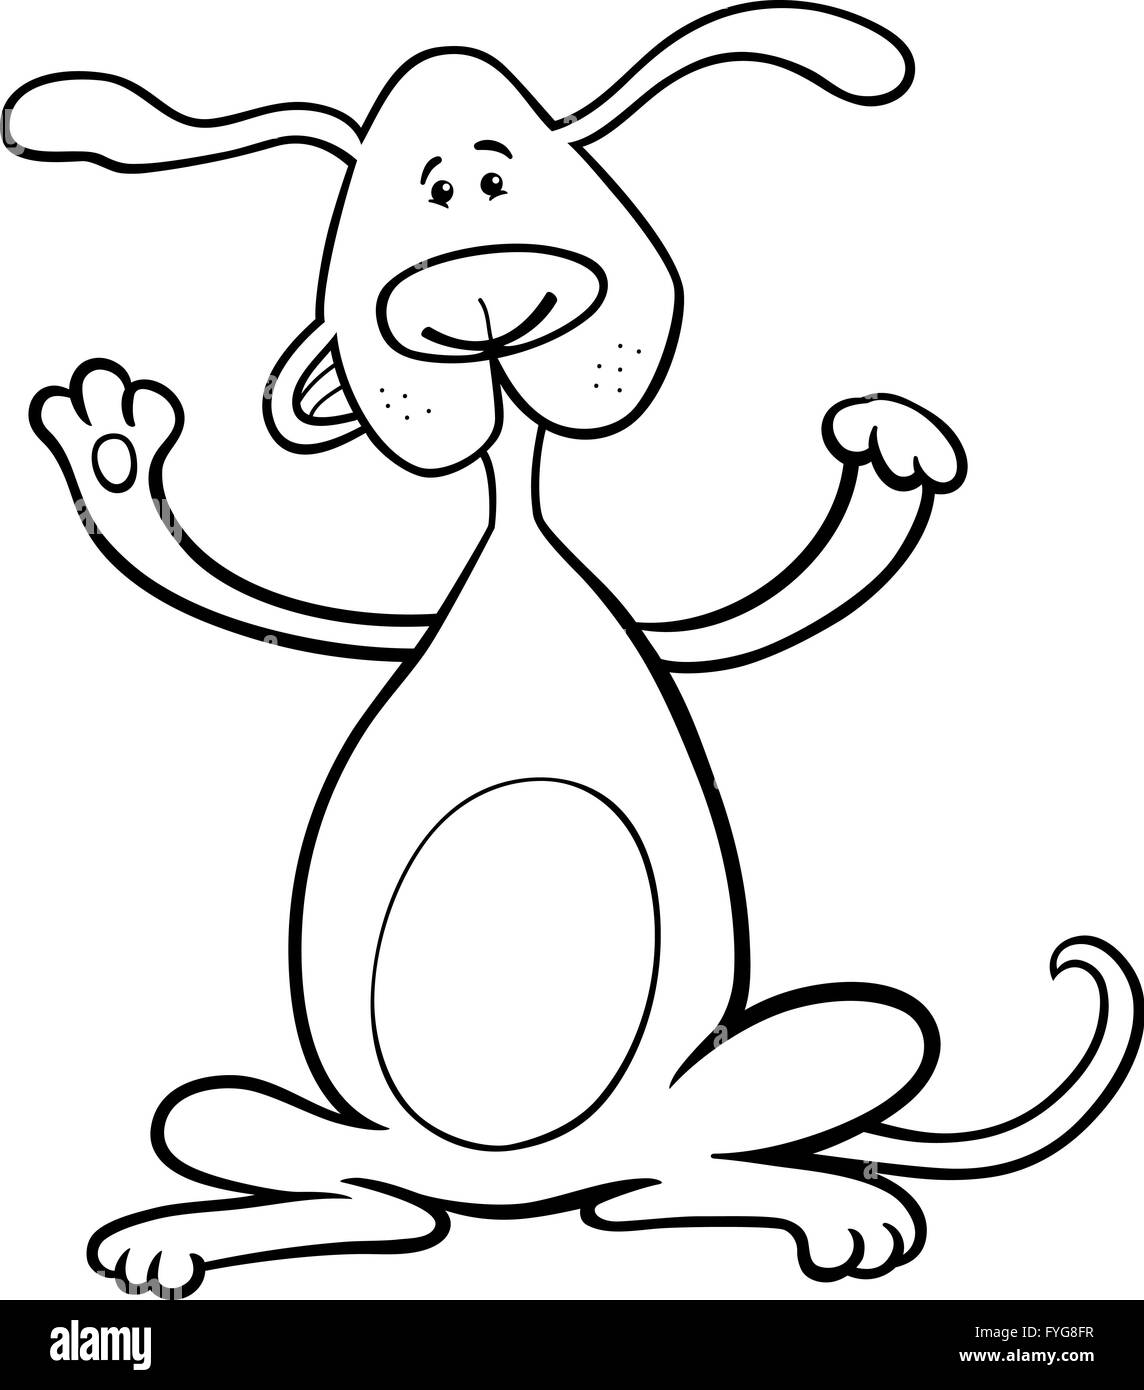 happy playful dog cartoon for coloring book Stock Photo